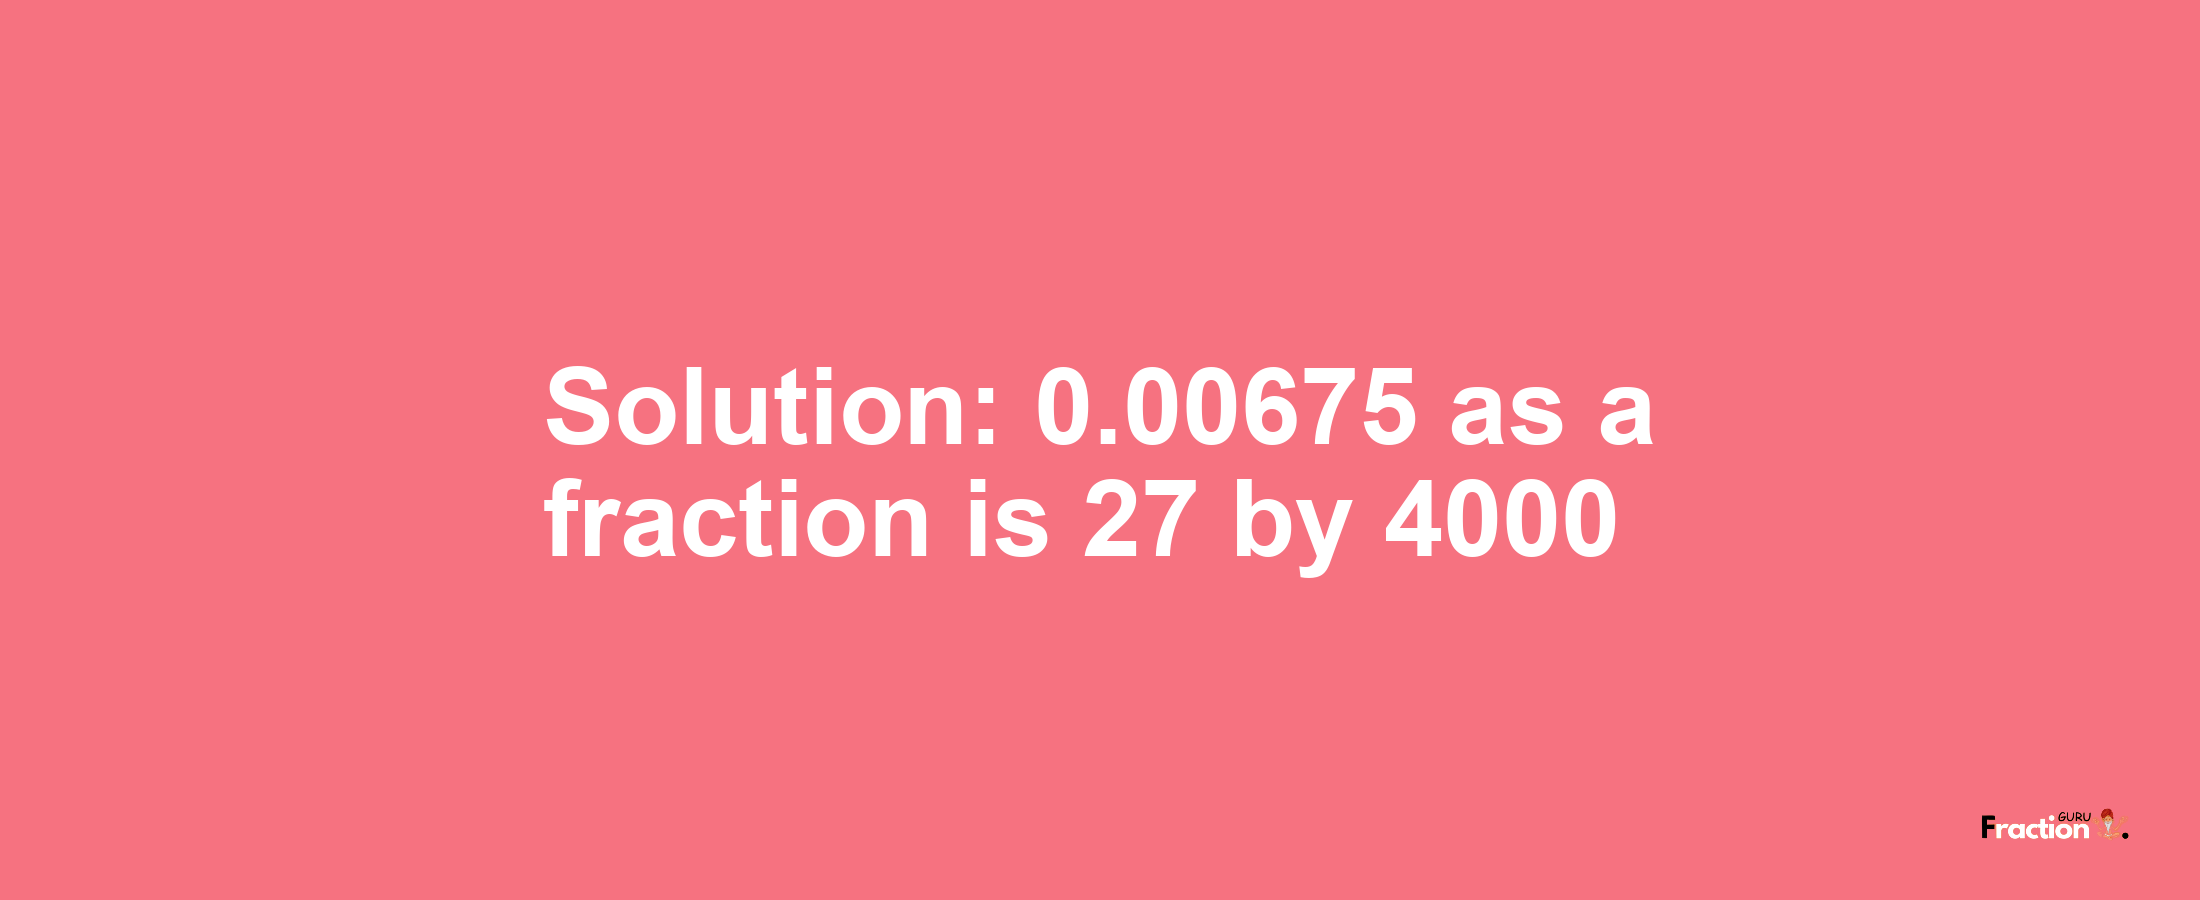 Solution:0.00675 as a fraction is 27/4000